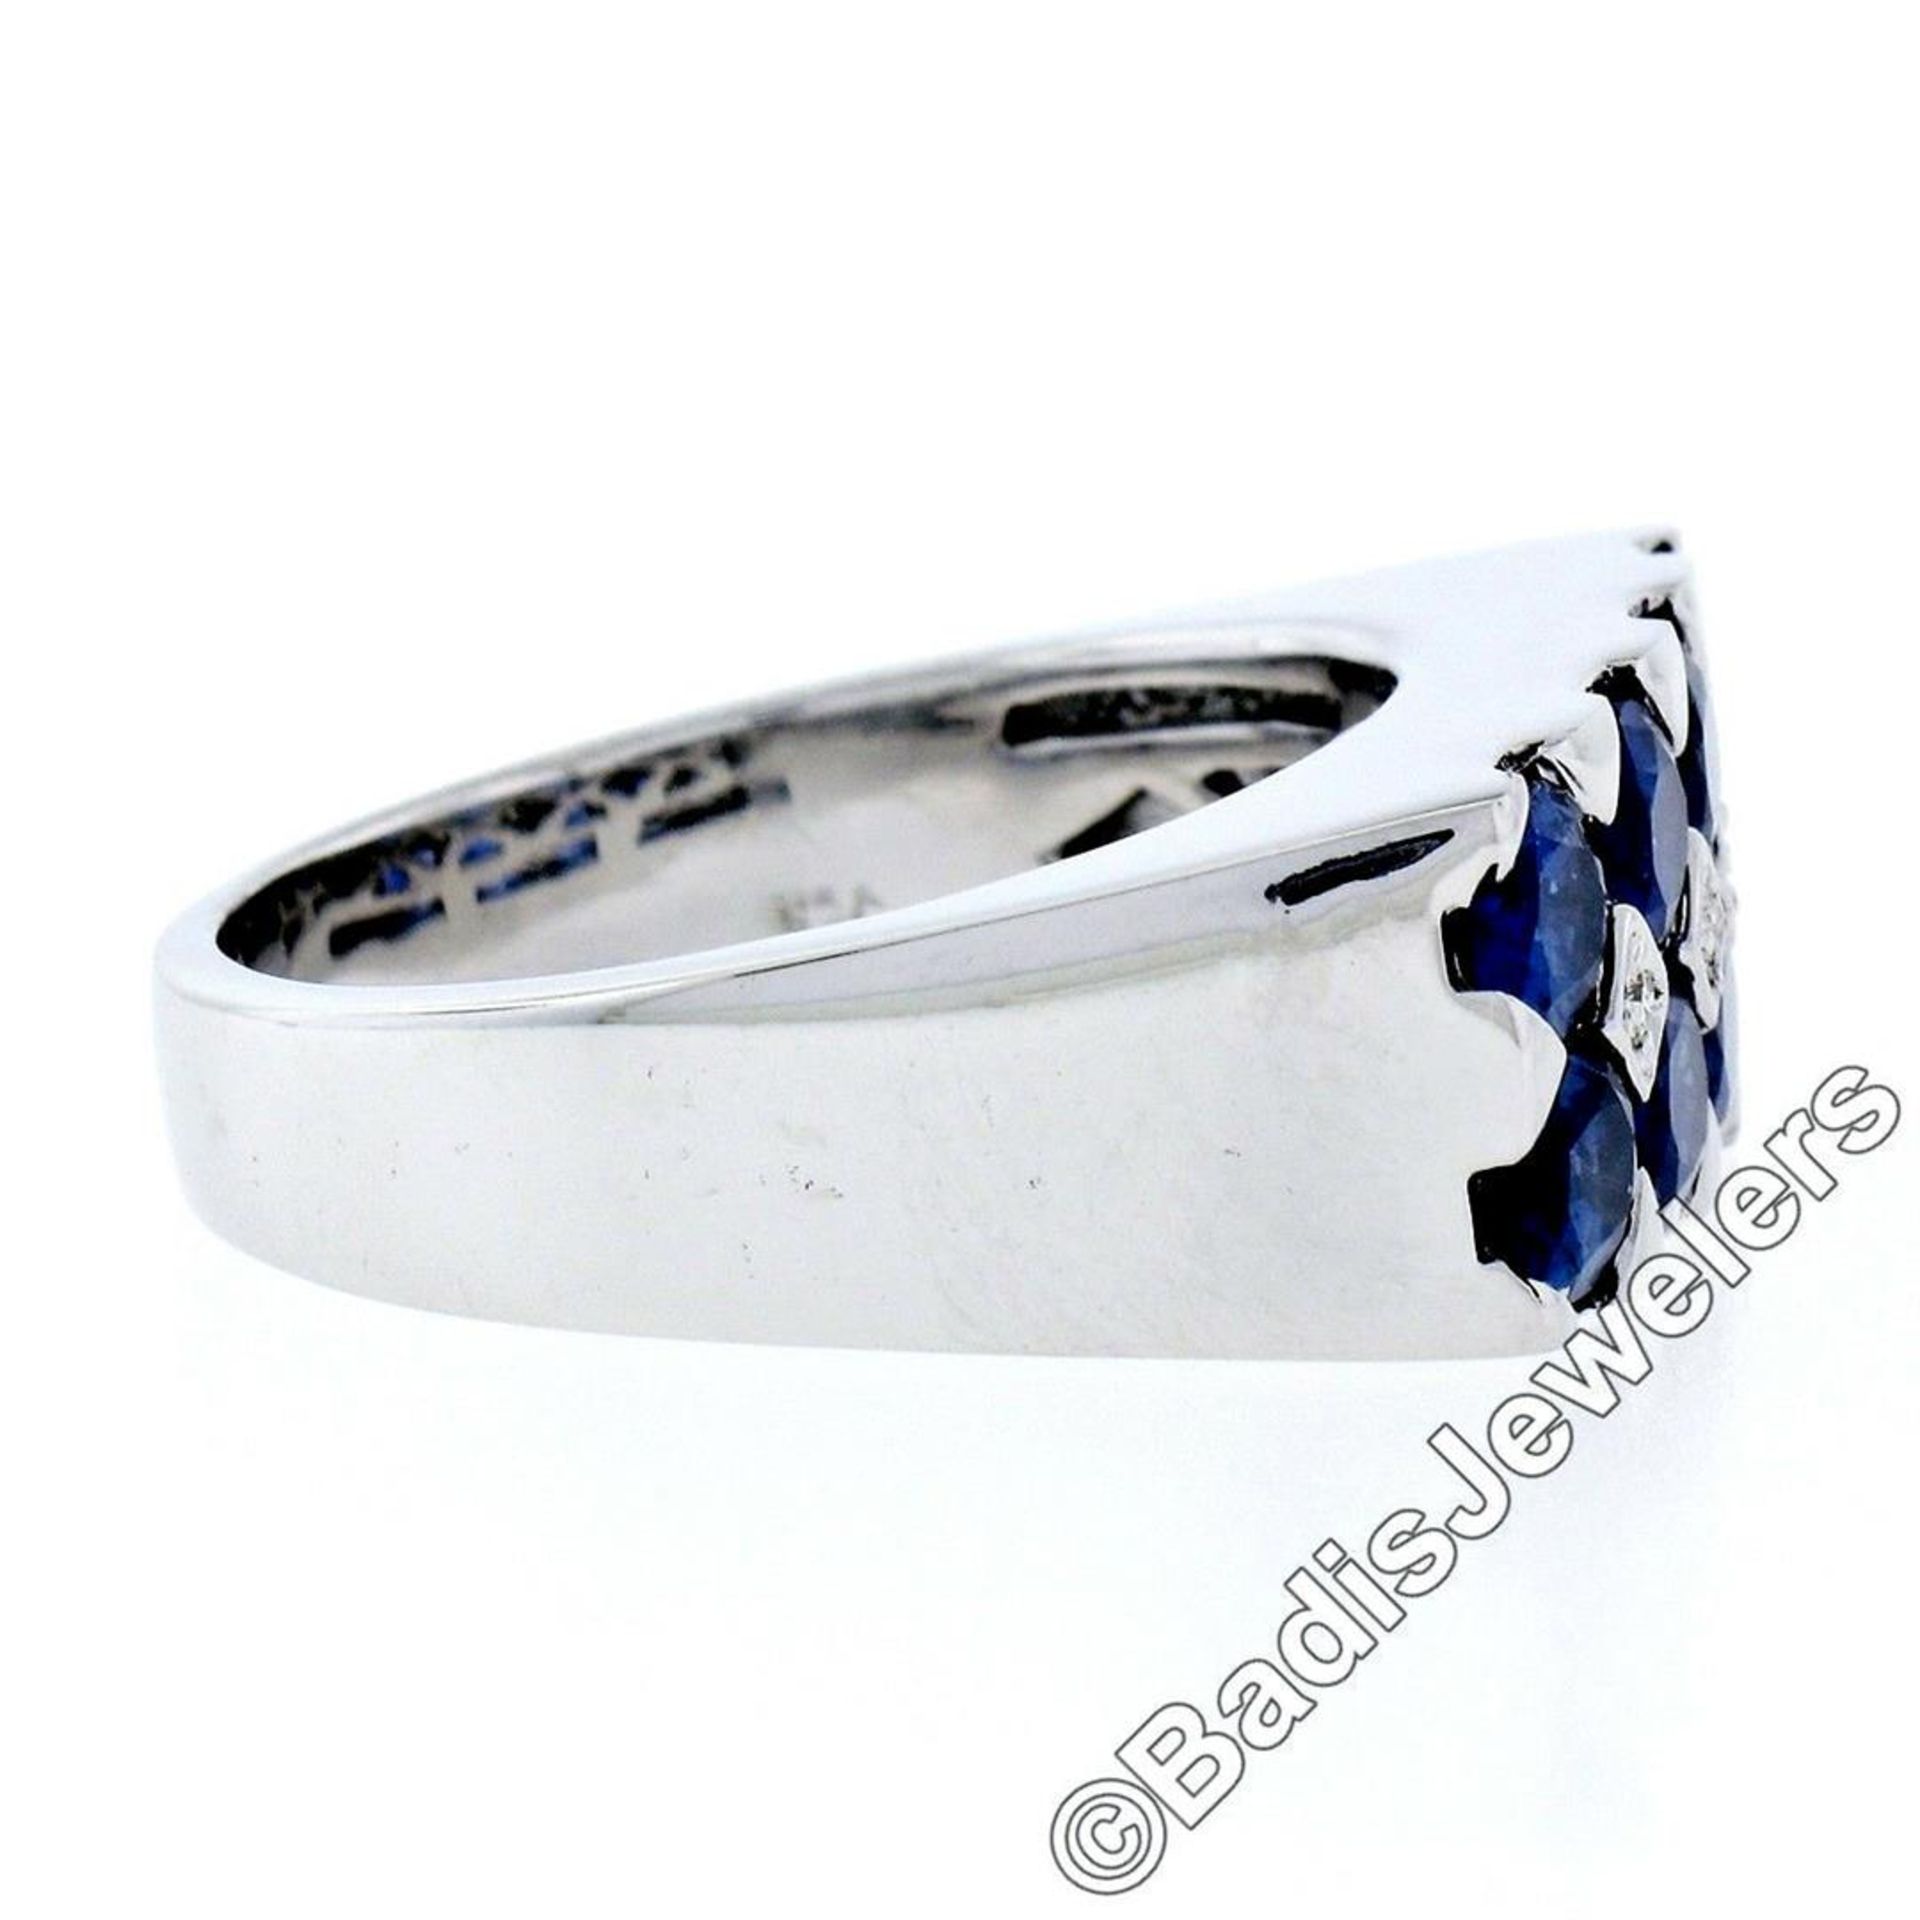 18kt White Gold 4.03ctw Dual Row Oval Cut Sapphire & Diamond Band Ring - Image 8 of 9